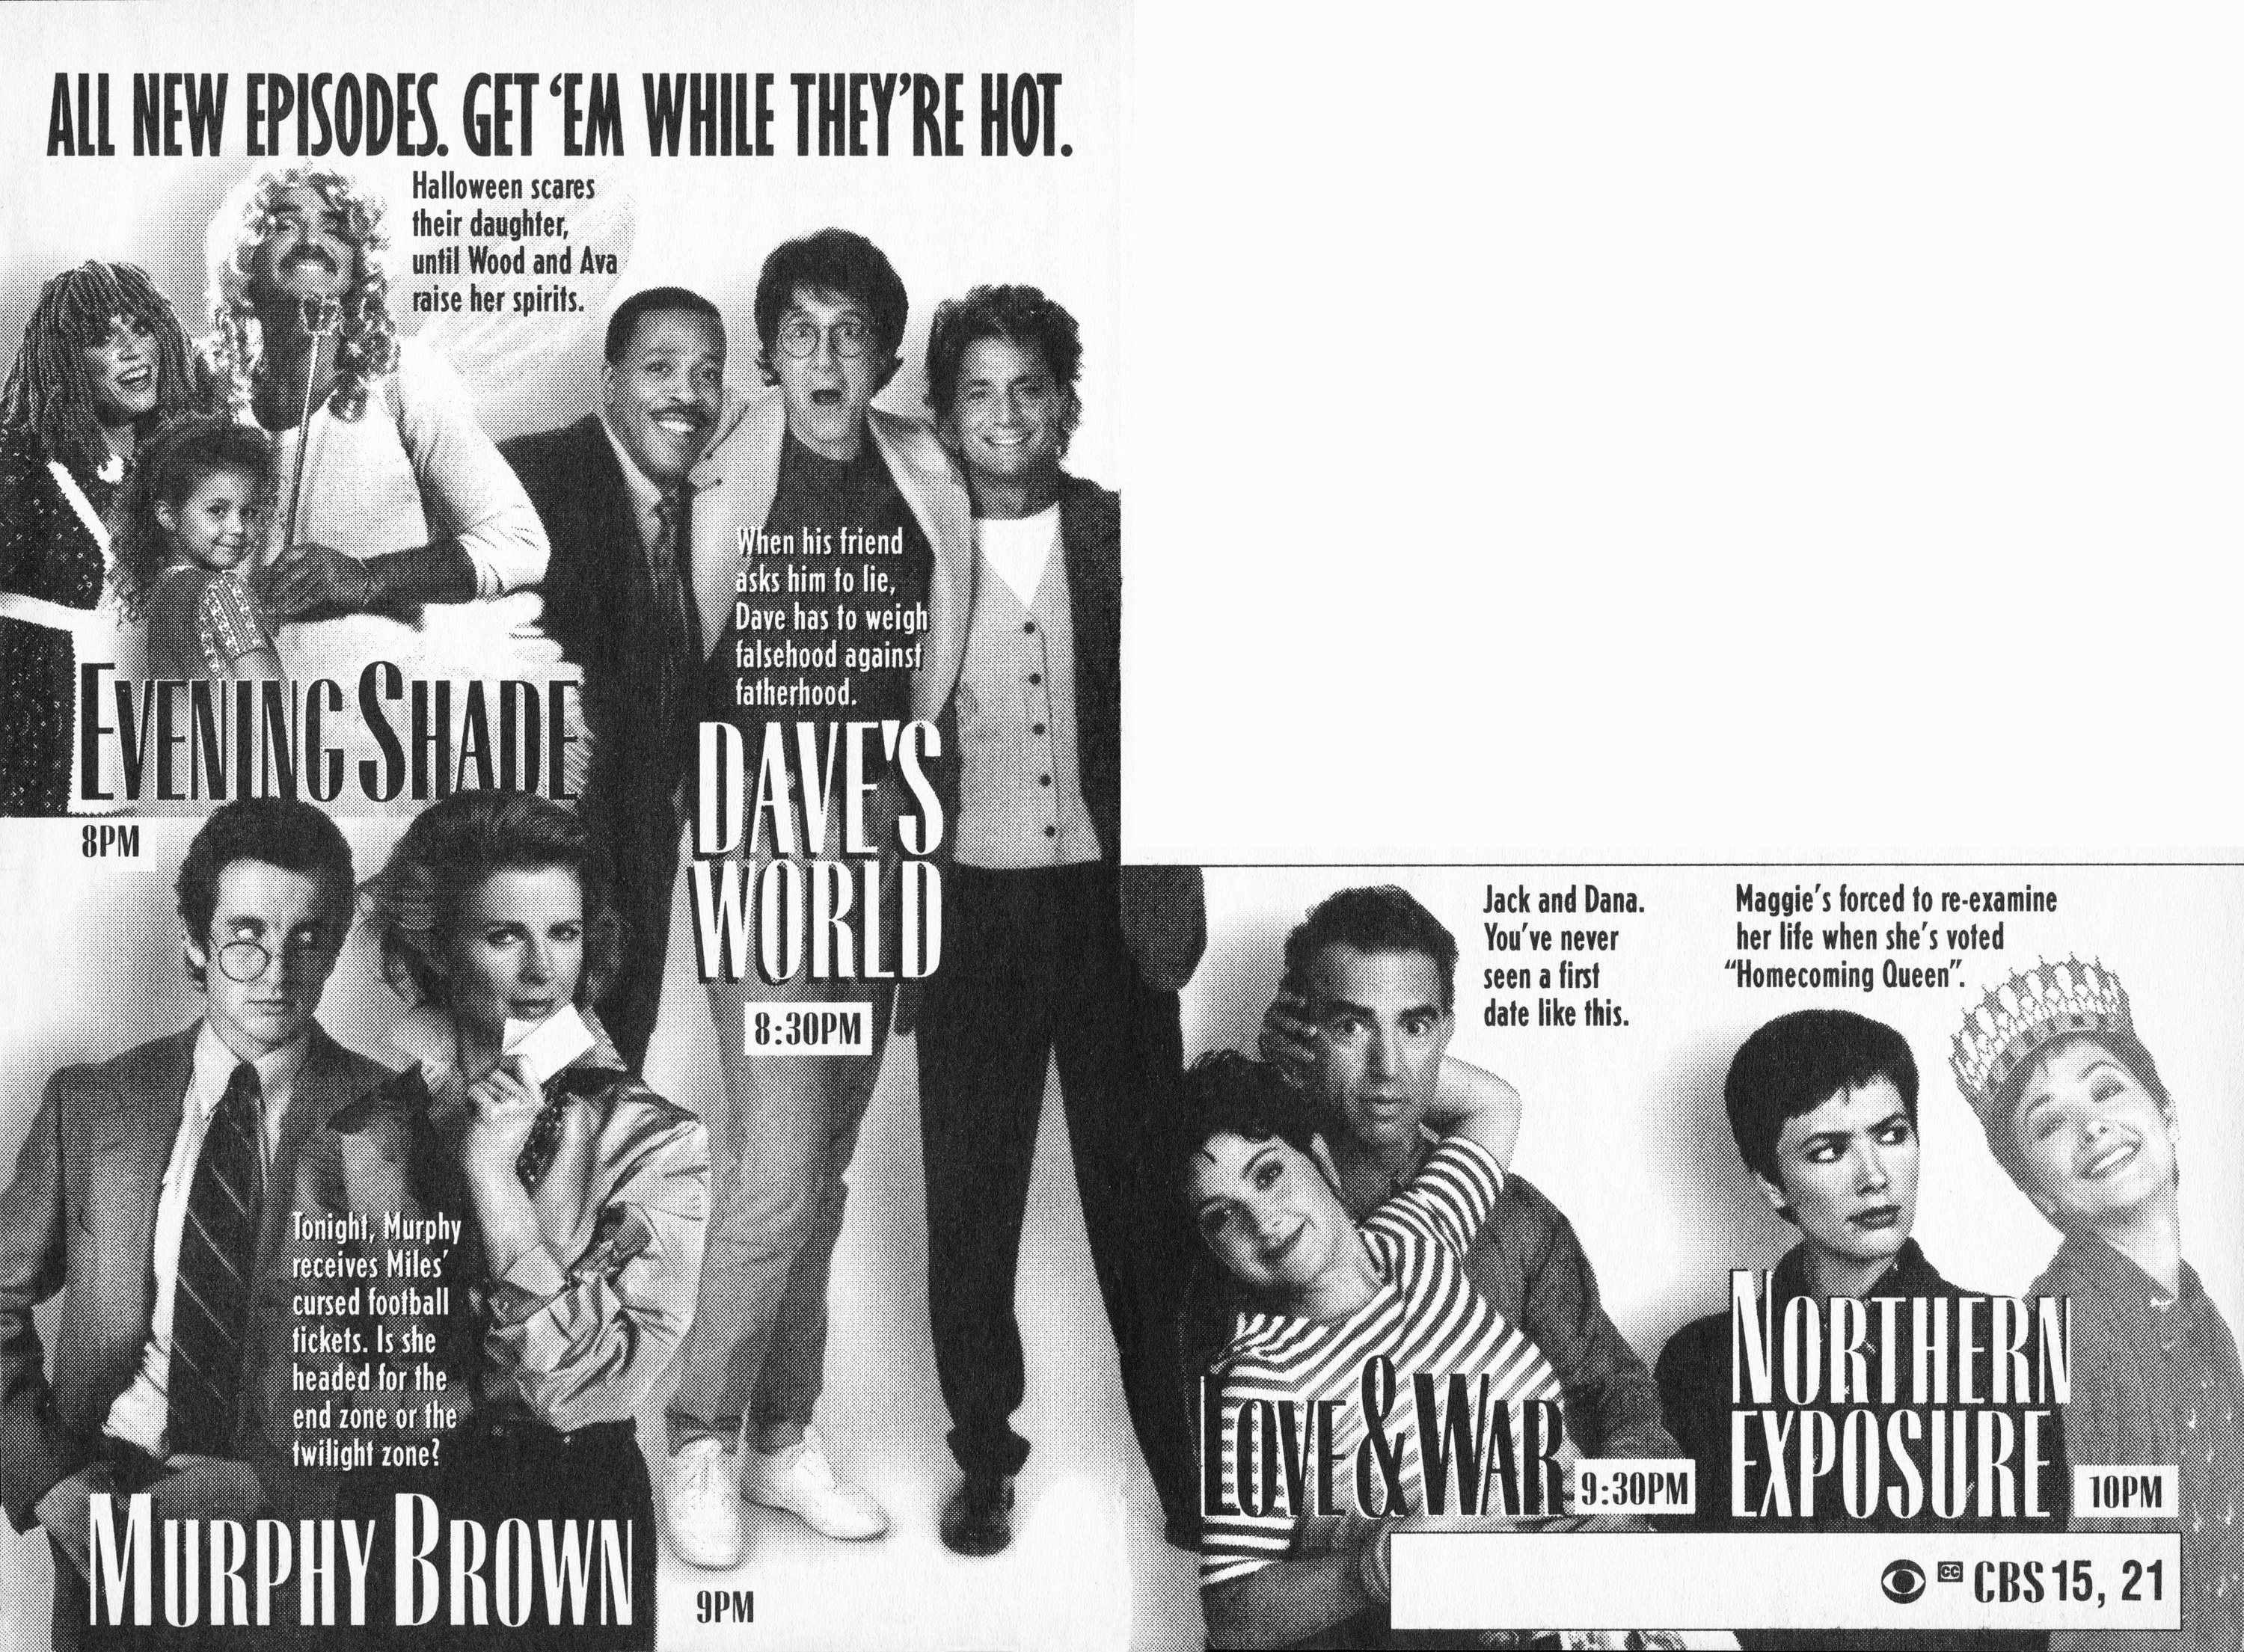 CBS Television advertisement as appeared in the October 23, 1993 issue of TV Guide magazine